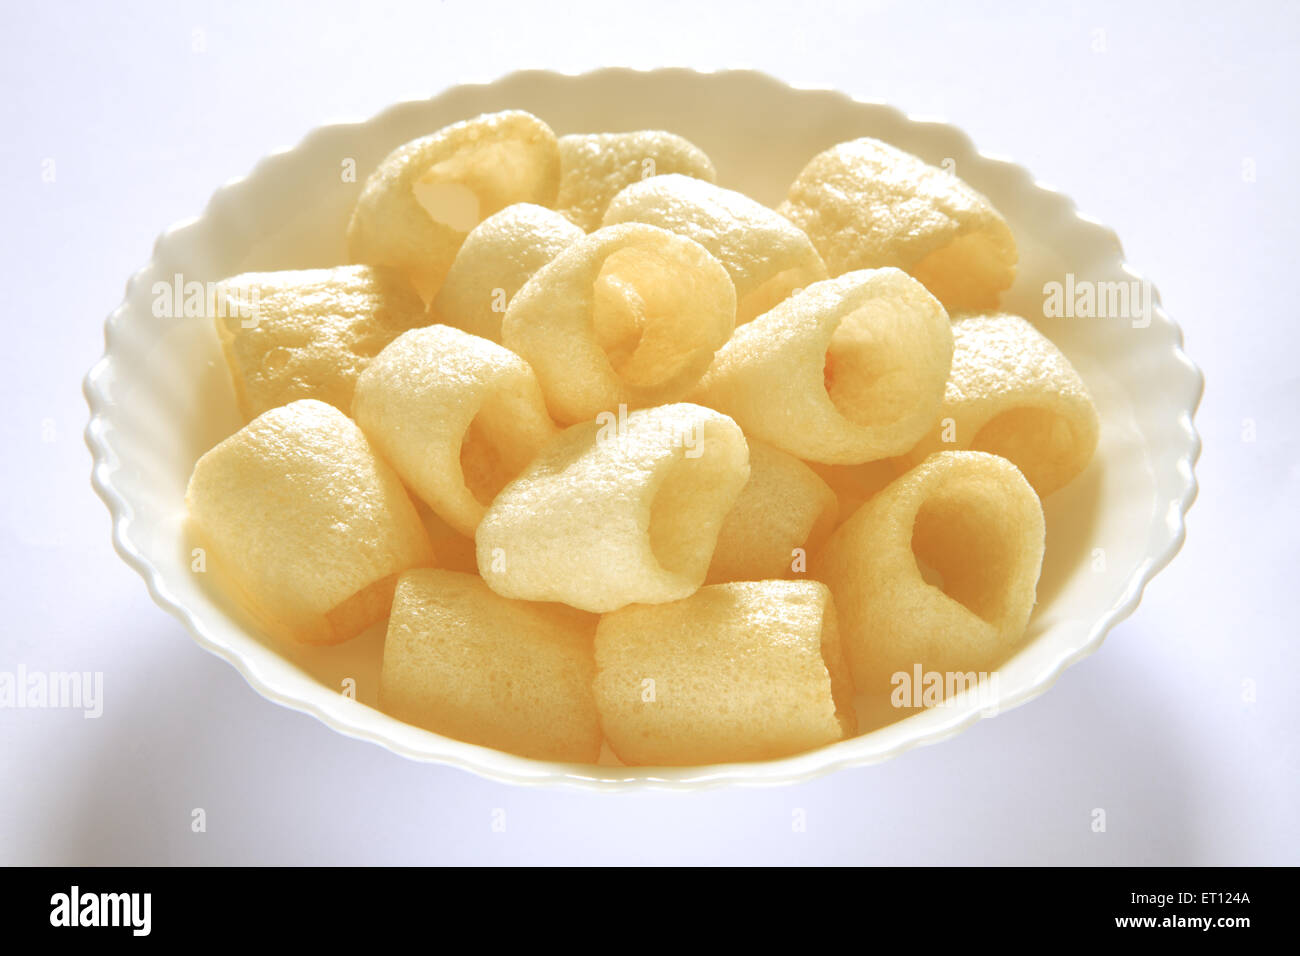 Roasted round chips in bowl on white background Stock Photo